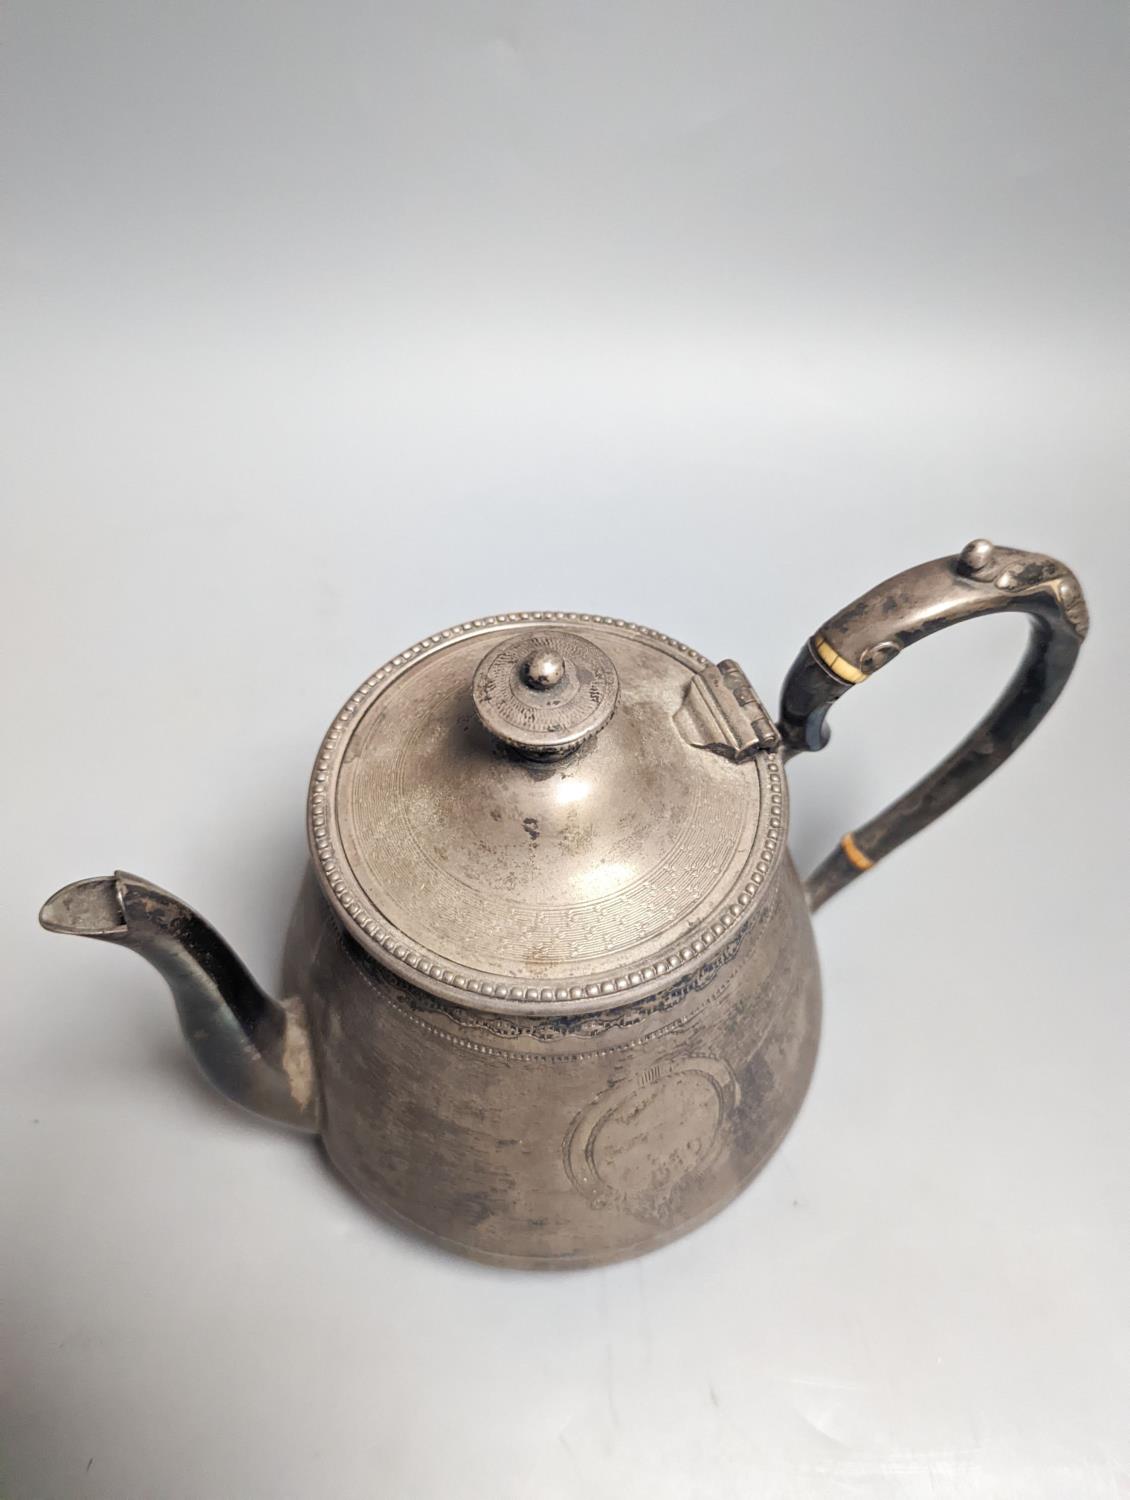 A Victorian engraved silver teapot, by Robert Hennell III, London, 1864, gross weight 19oz. - Image 2 of 4